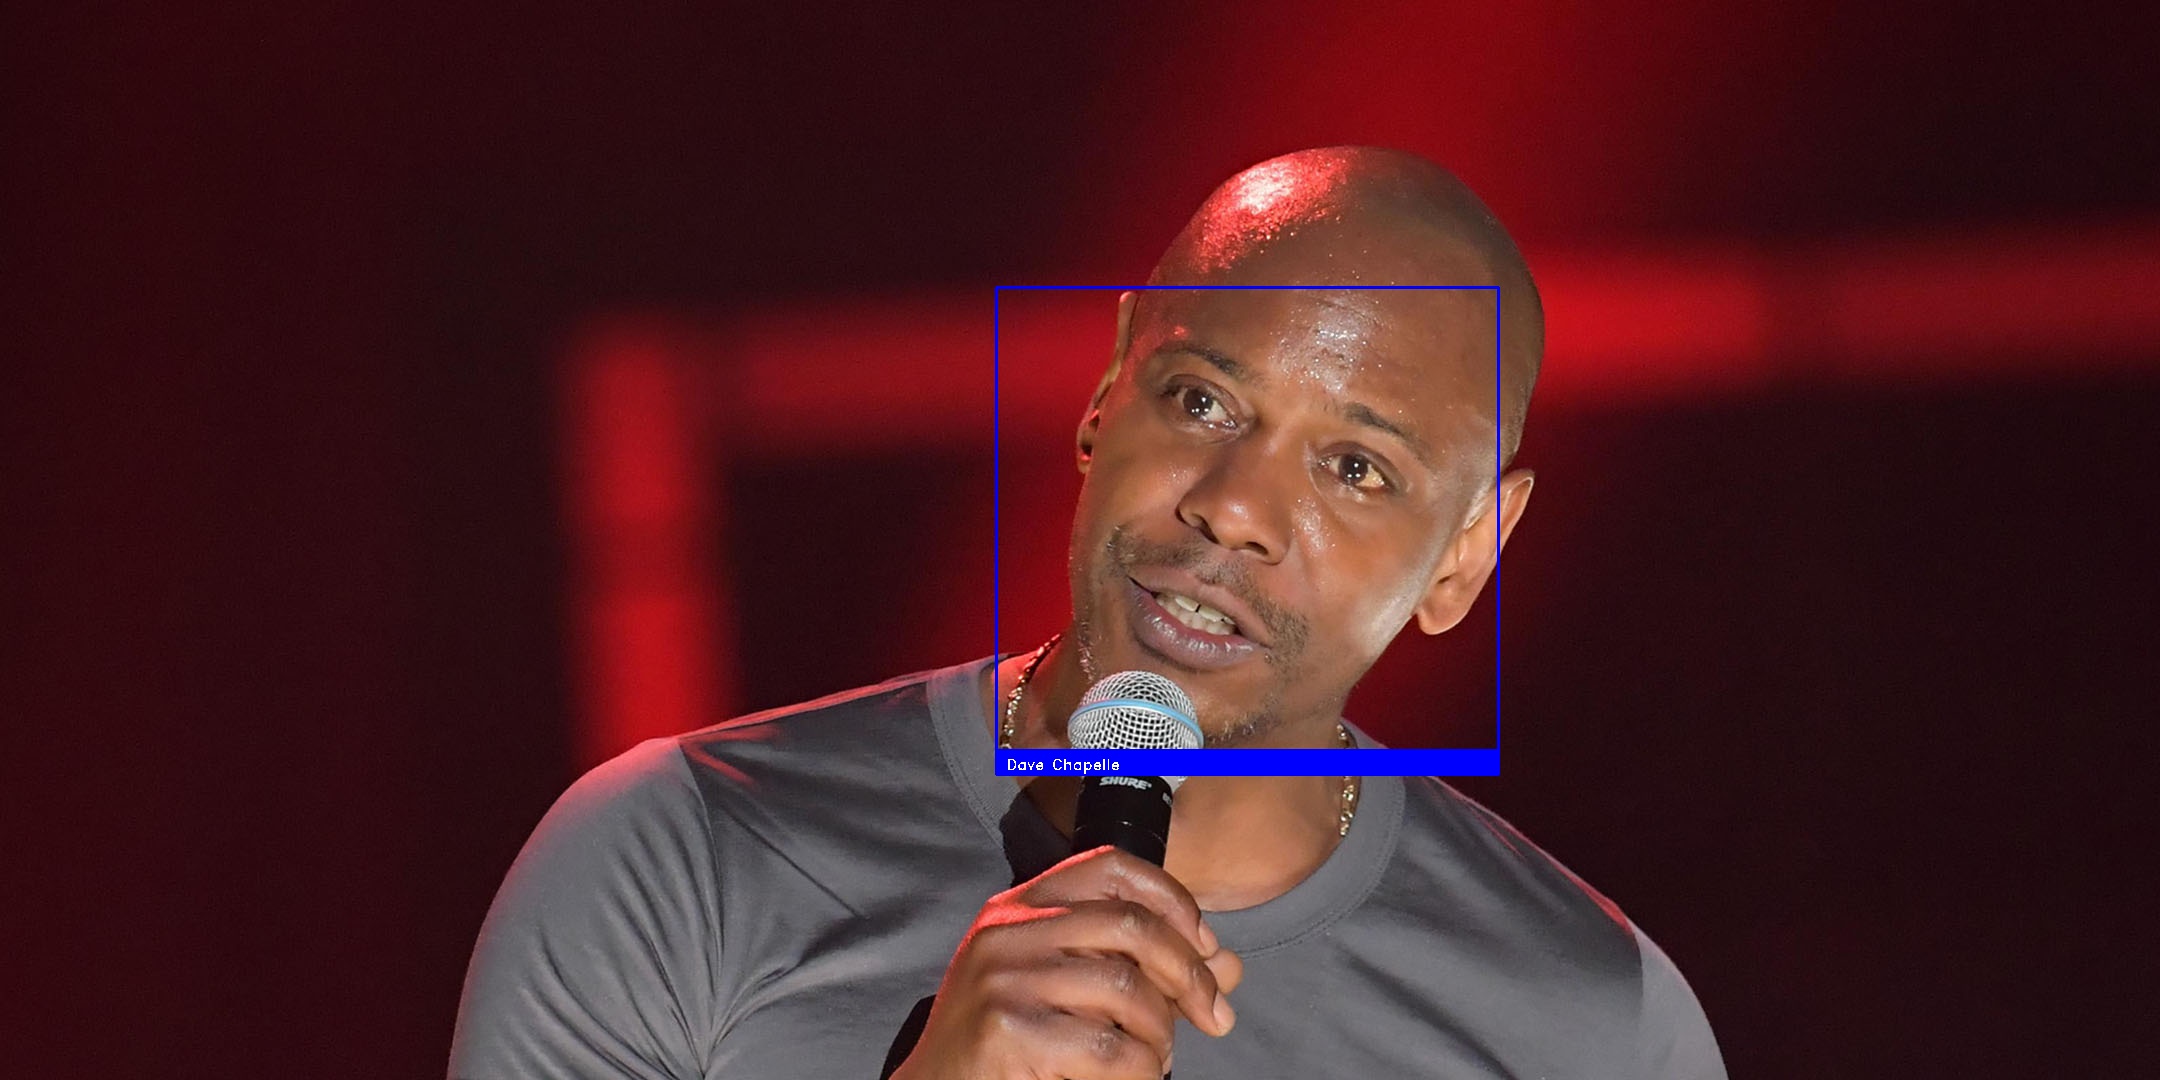 Dave Chapelle recognized from test image